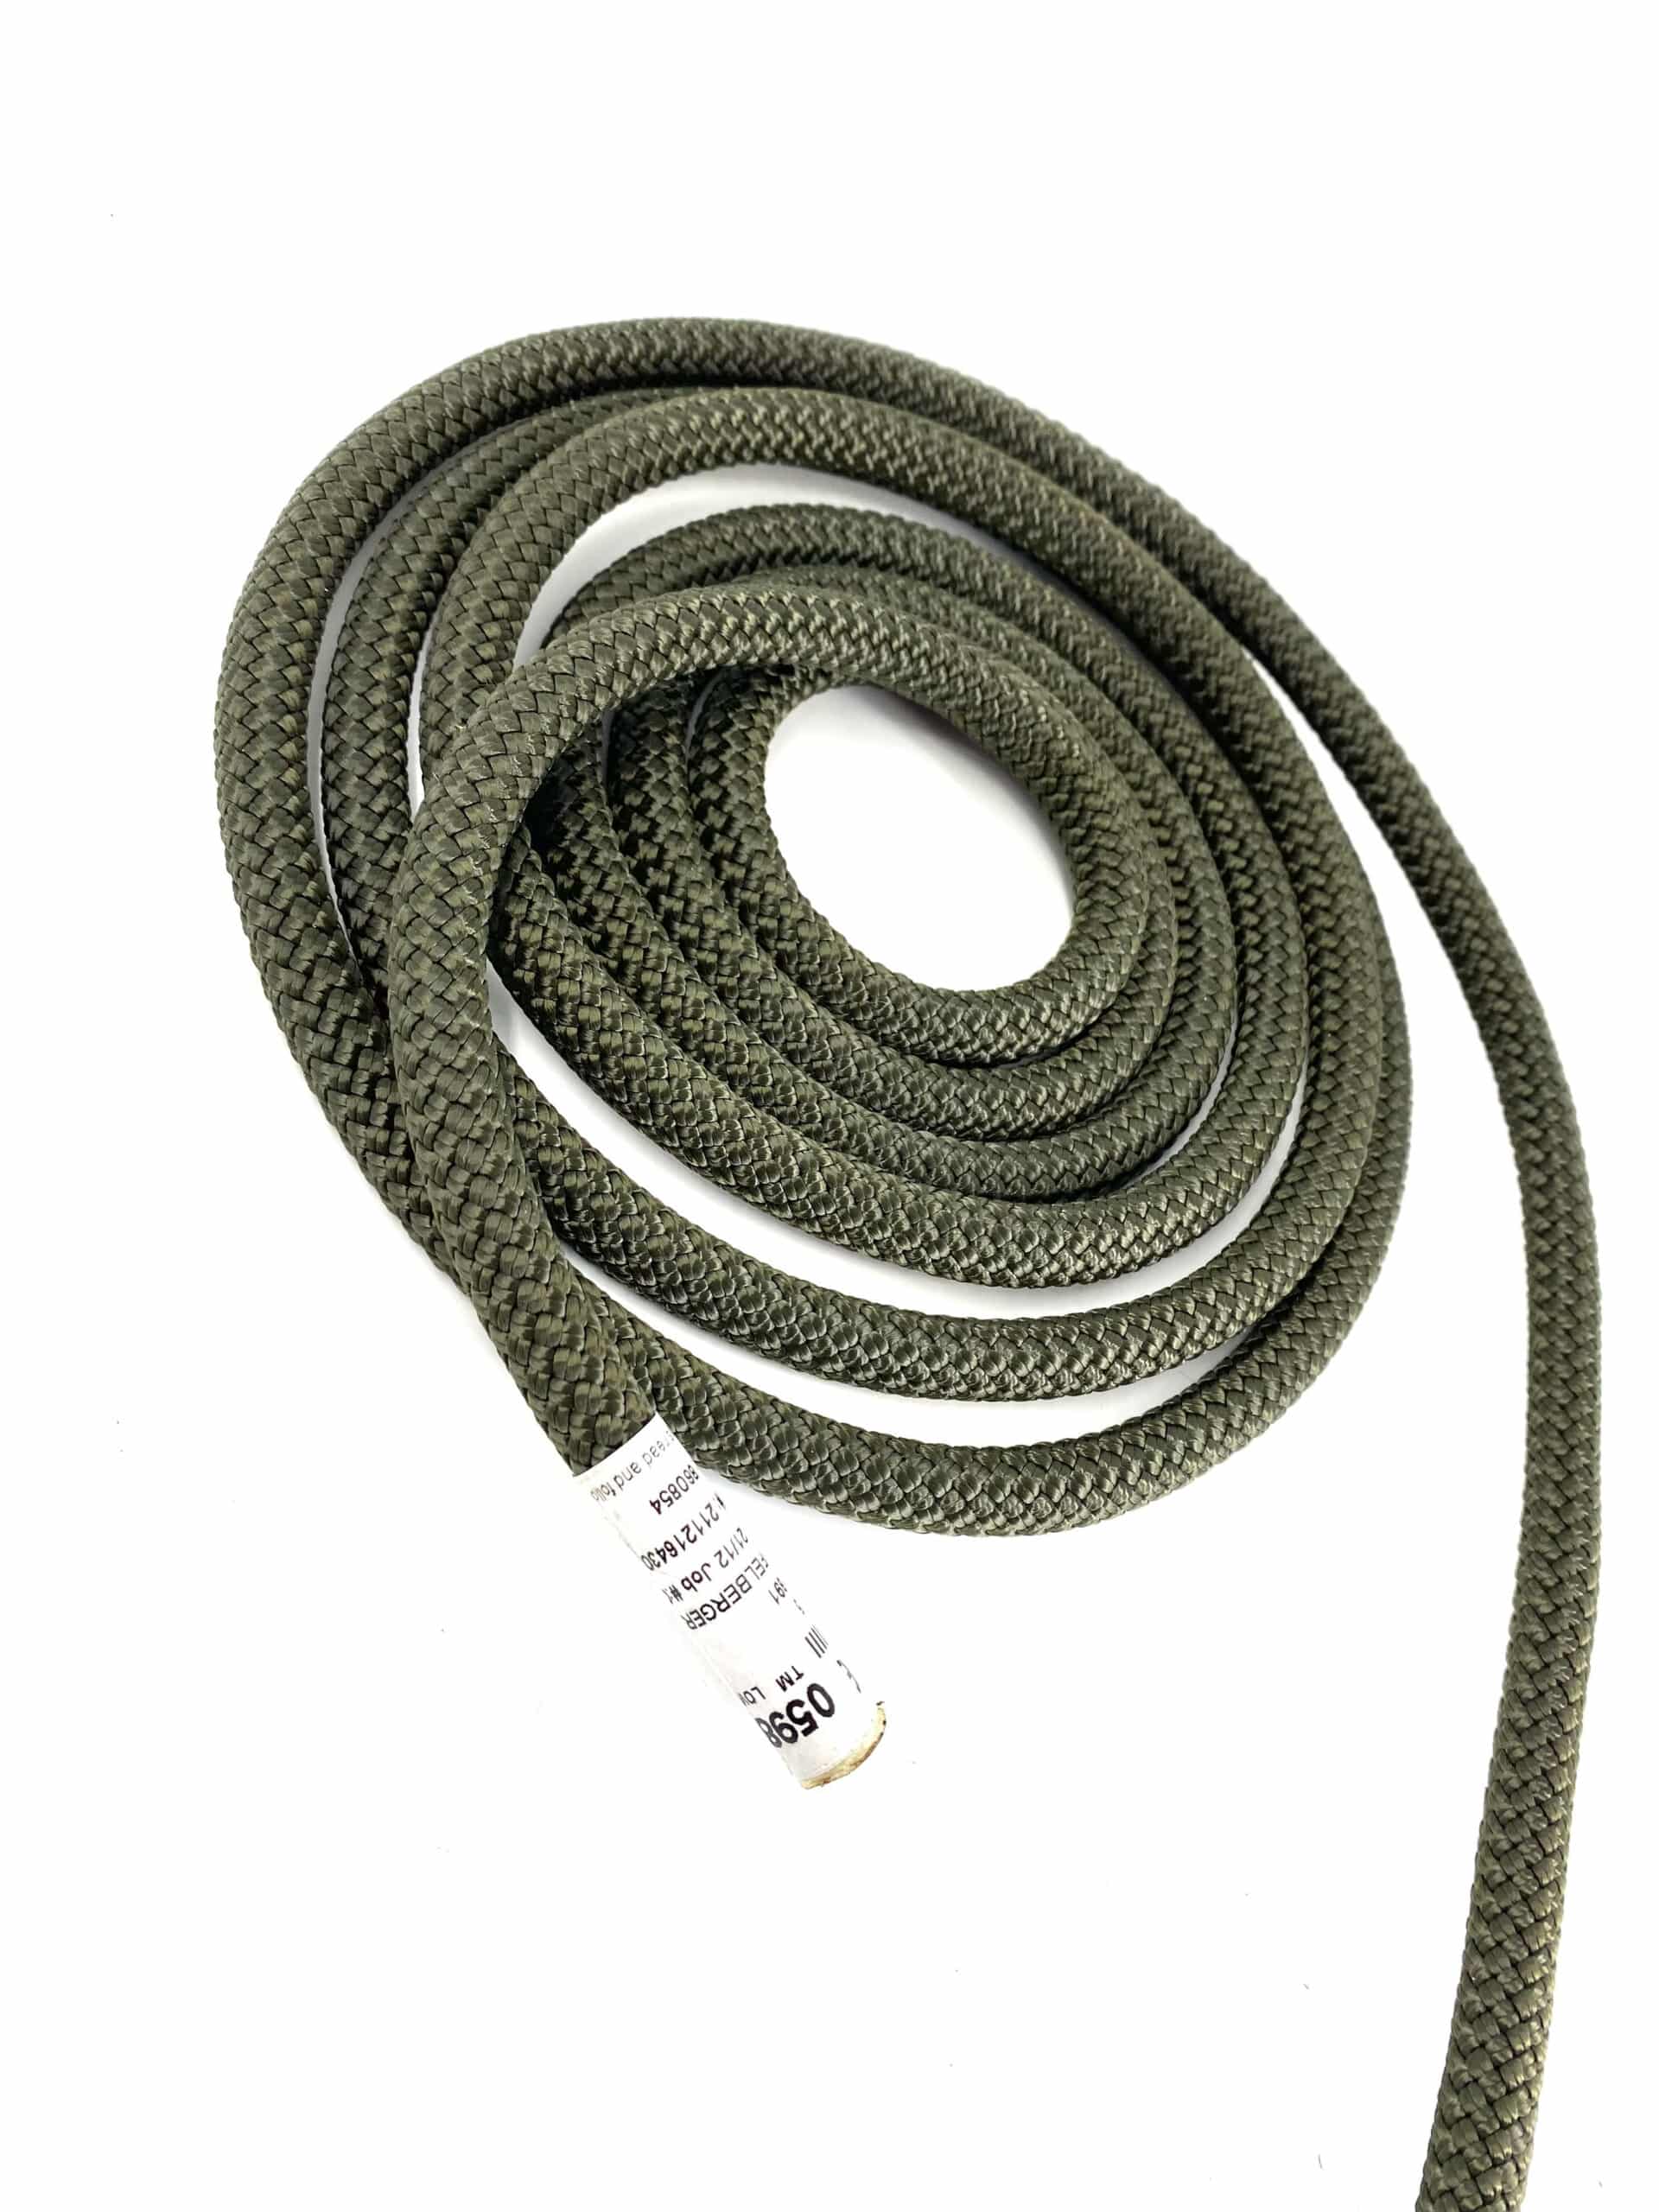 Teufelberger KMIII Climbing-Rated Rope (Sold by the foot) for saddle hunting